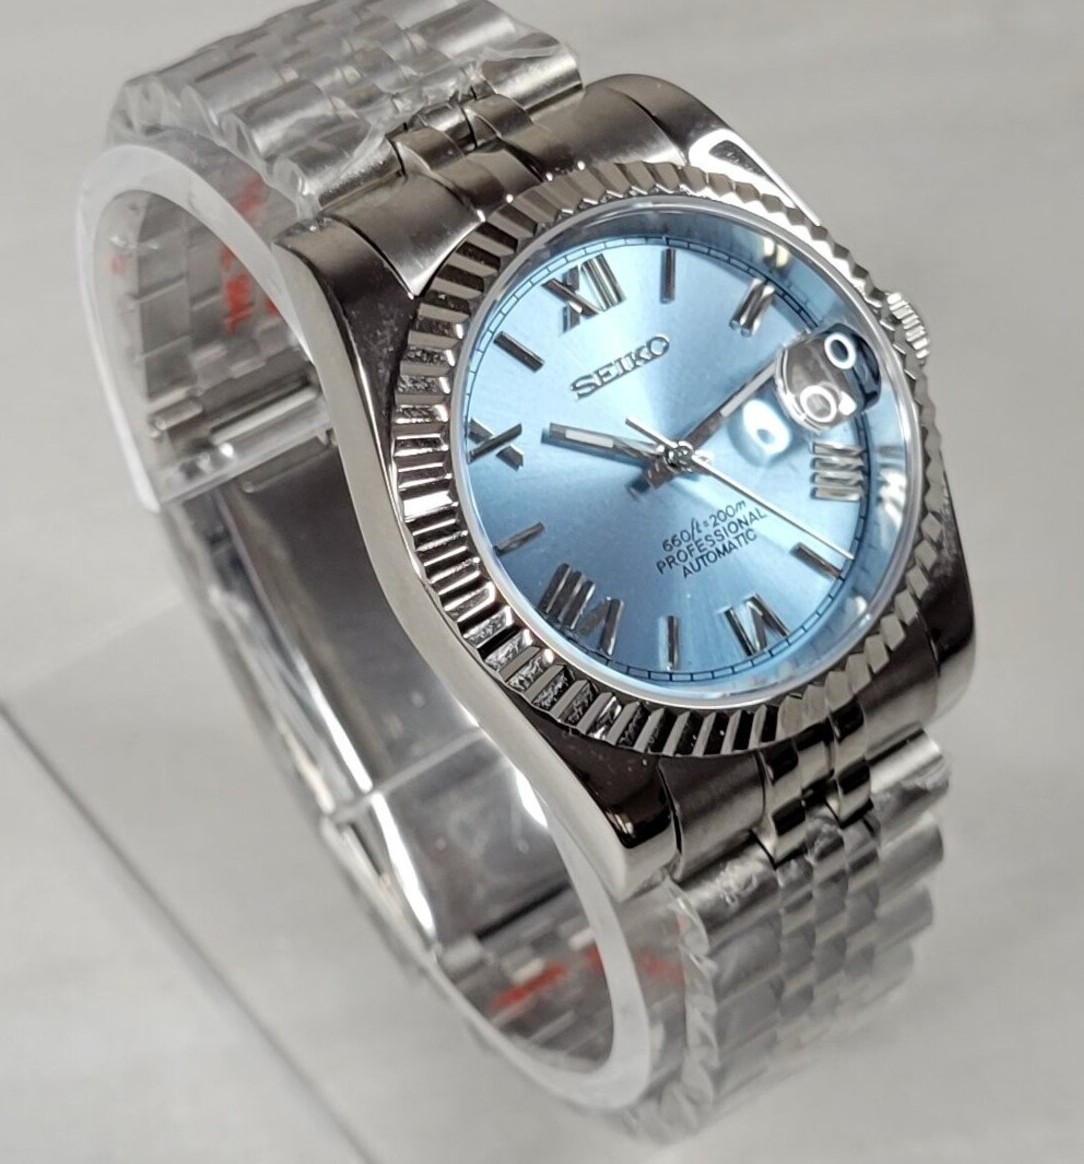 39mm Fluted Explorer Homage, Pale Blue Dial, Roman Numerals, Stainless Case, Sapphire Crystal - NH35A